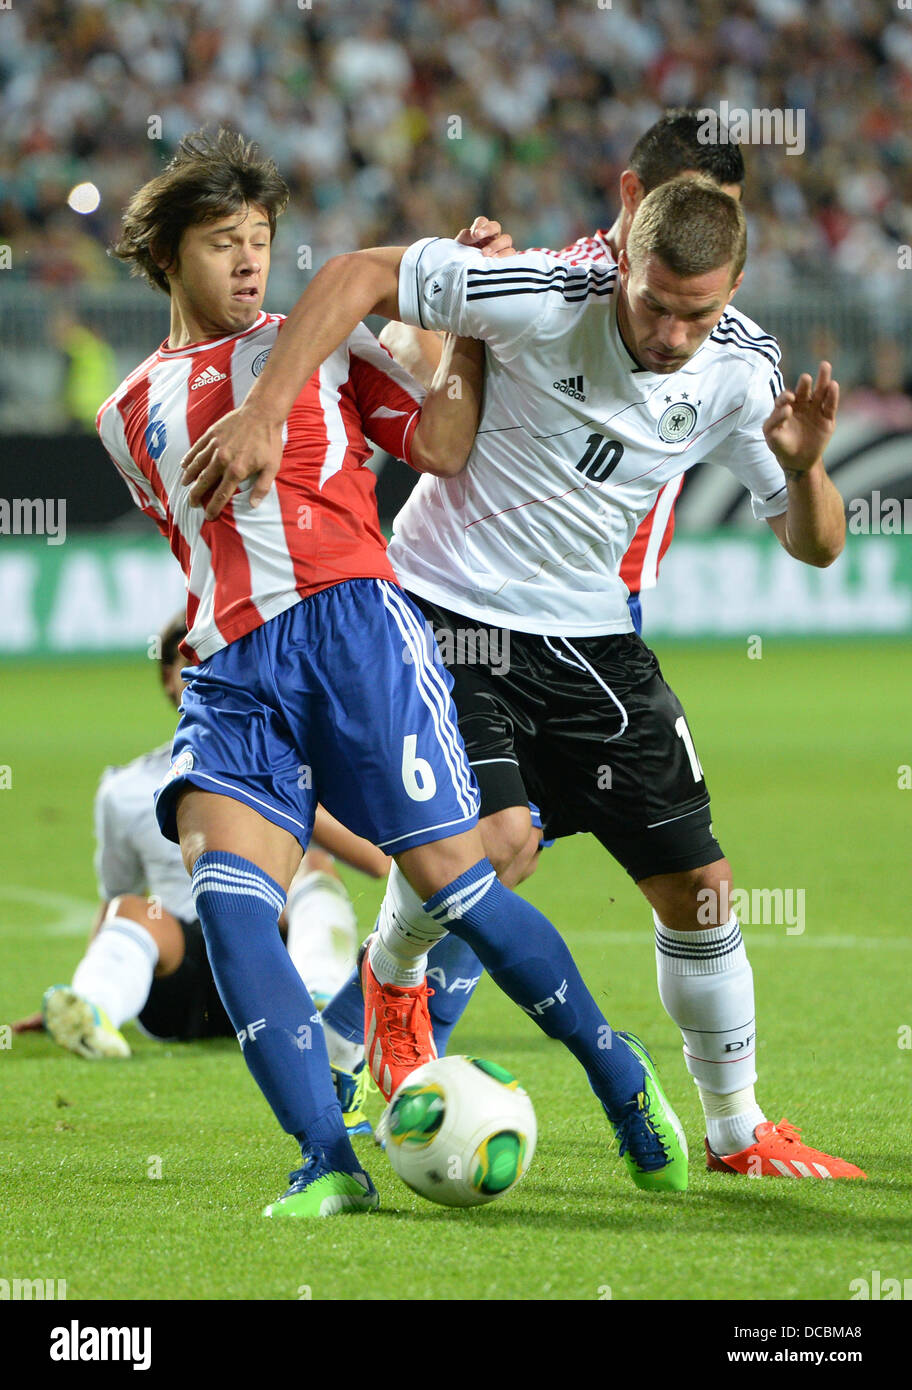 Kaiserslautern, Germany. 14th Aug, 2013. Germany's Lukas Podolski (R) and Paraguay's Oscar Romero (l) vie for the ball during the international friendly soccer match between Germany vs Paraguay at Fritz-Walter-Stadium in Kaiserslautern, Germany, 14 August 2013. Photo: Boris Roessler/dpa/Alamy Live News © dpa picture alliance/Alamy Live News Stock Photo